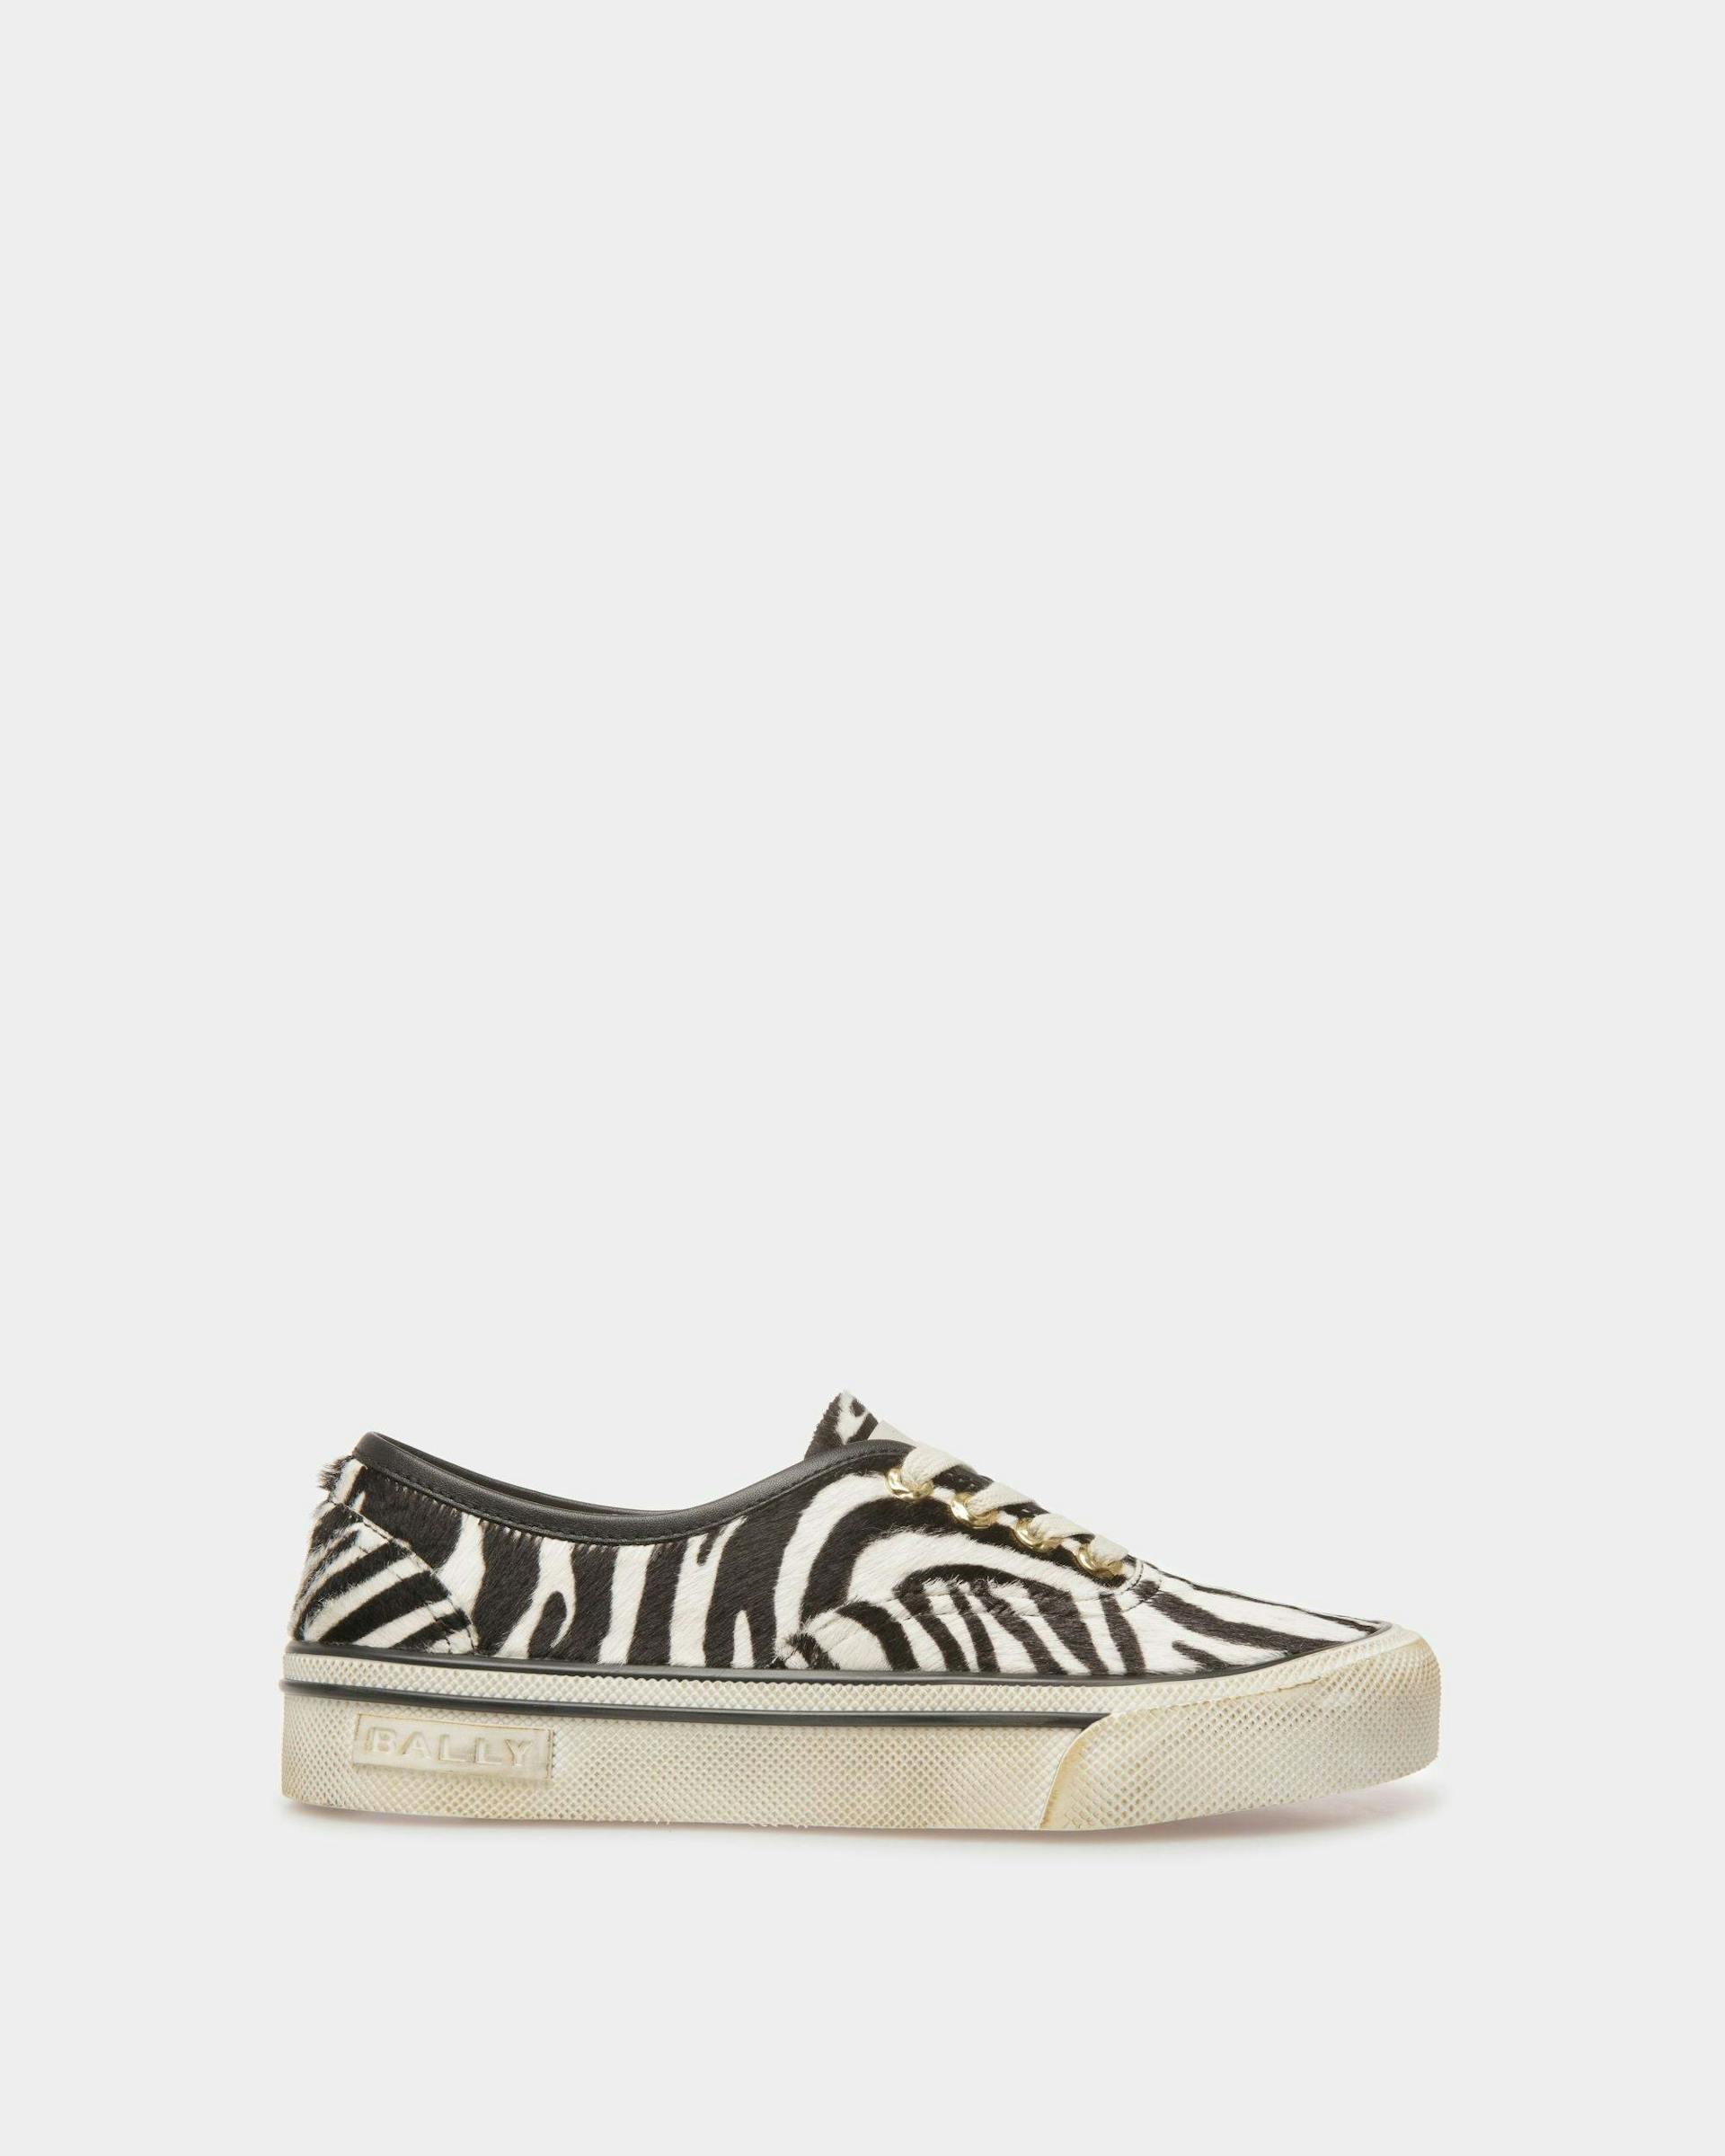 Santa Ana Sneakers In White And Black Haircalf Leather - Women's - Bally - 01